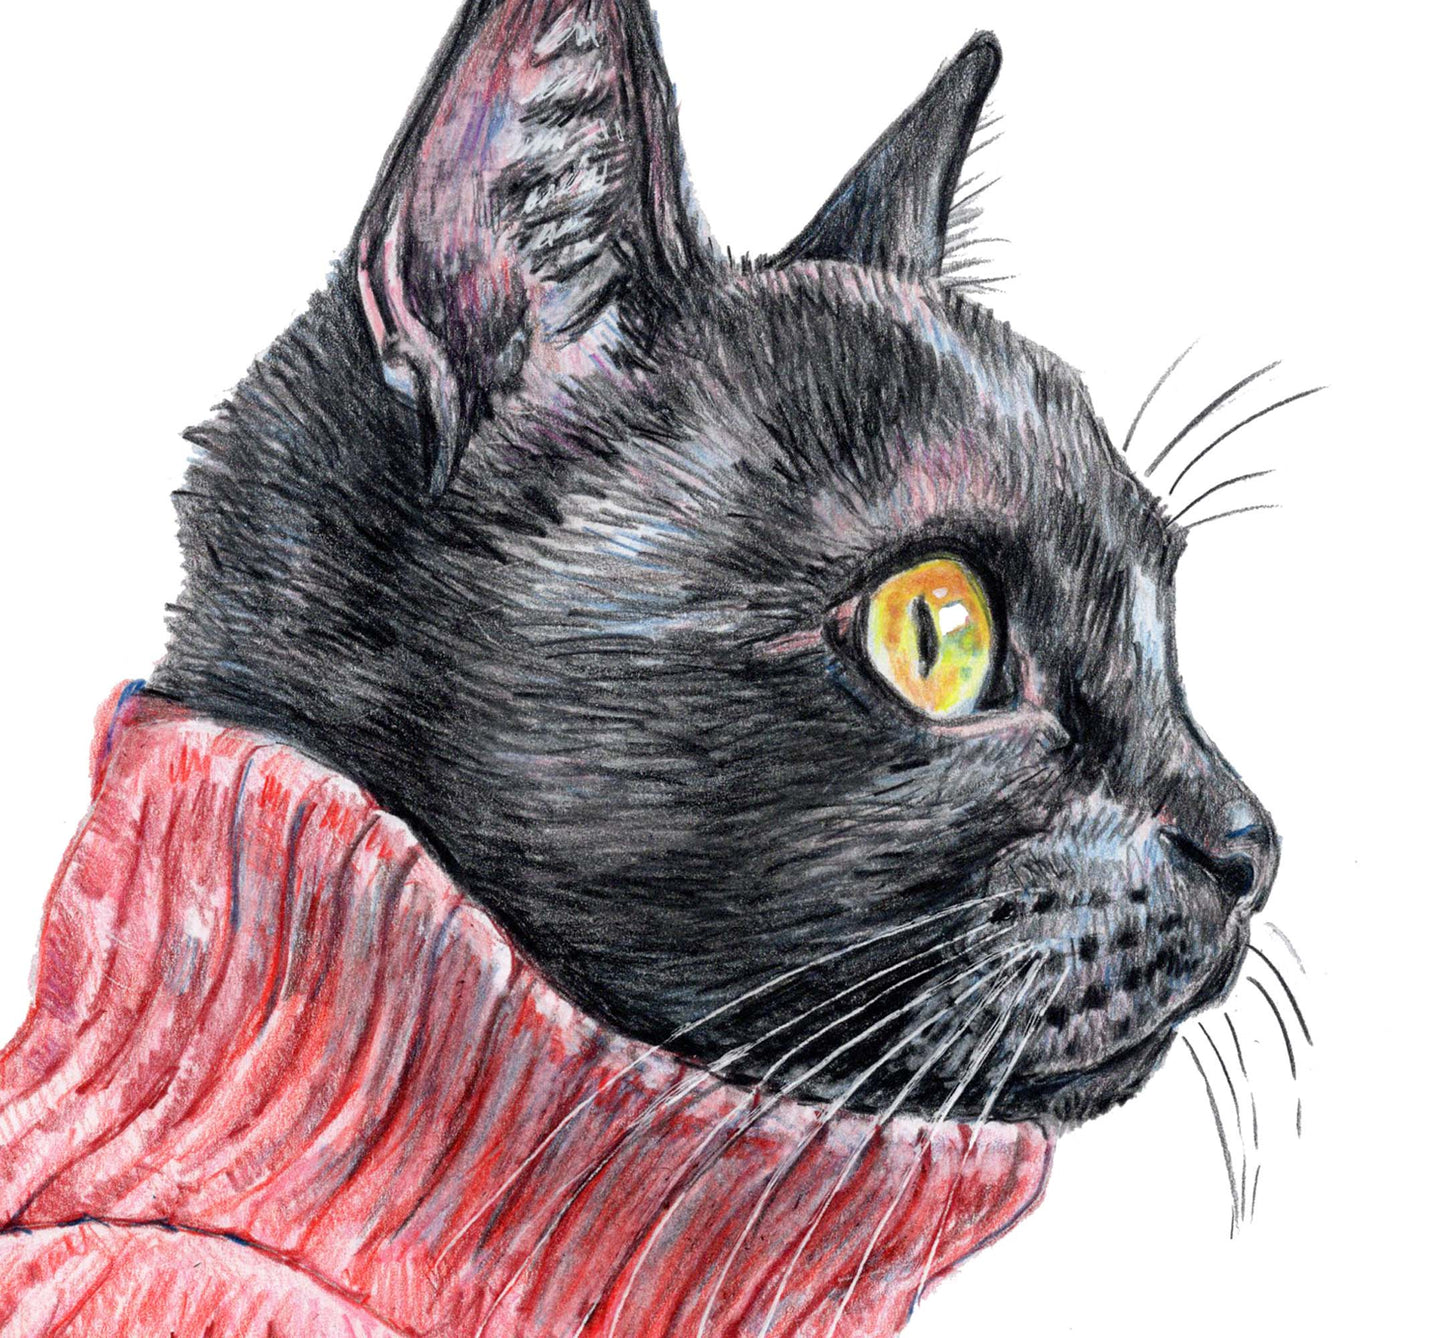 Coloured pencil drawing of a black cat in profile wearing a red turtleneck sweater. Art by Deidre Wicks